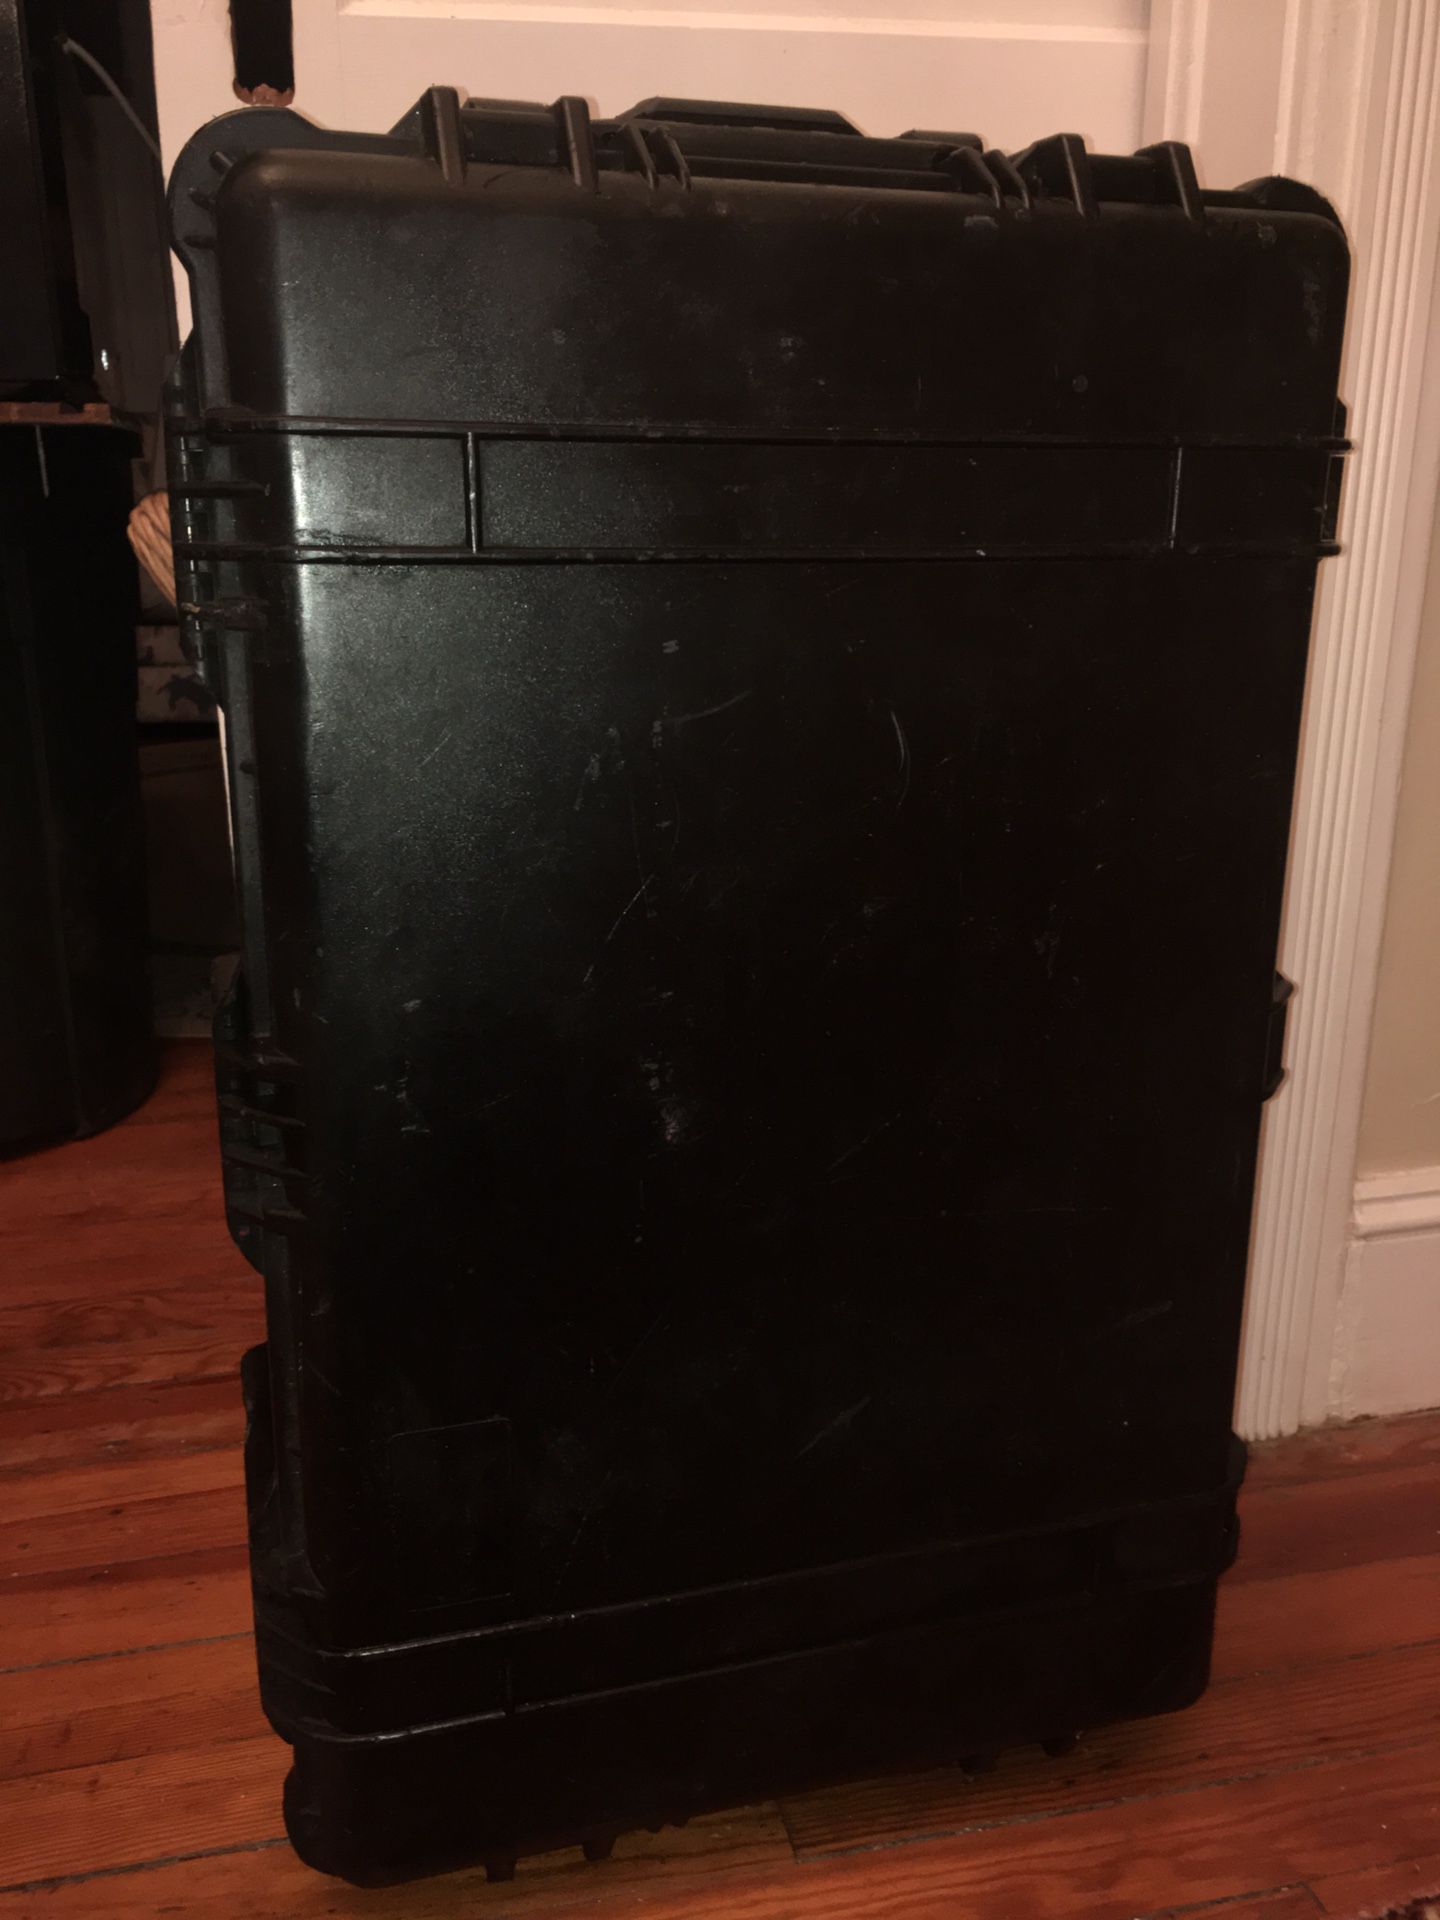 XL Pelican Case 1670 with padded dividers